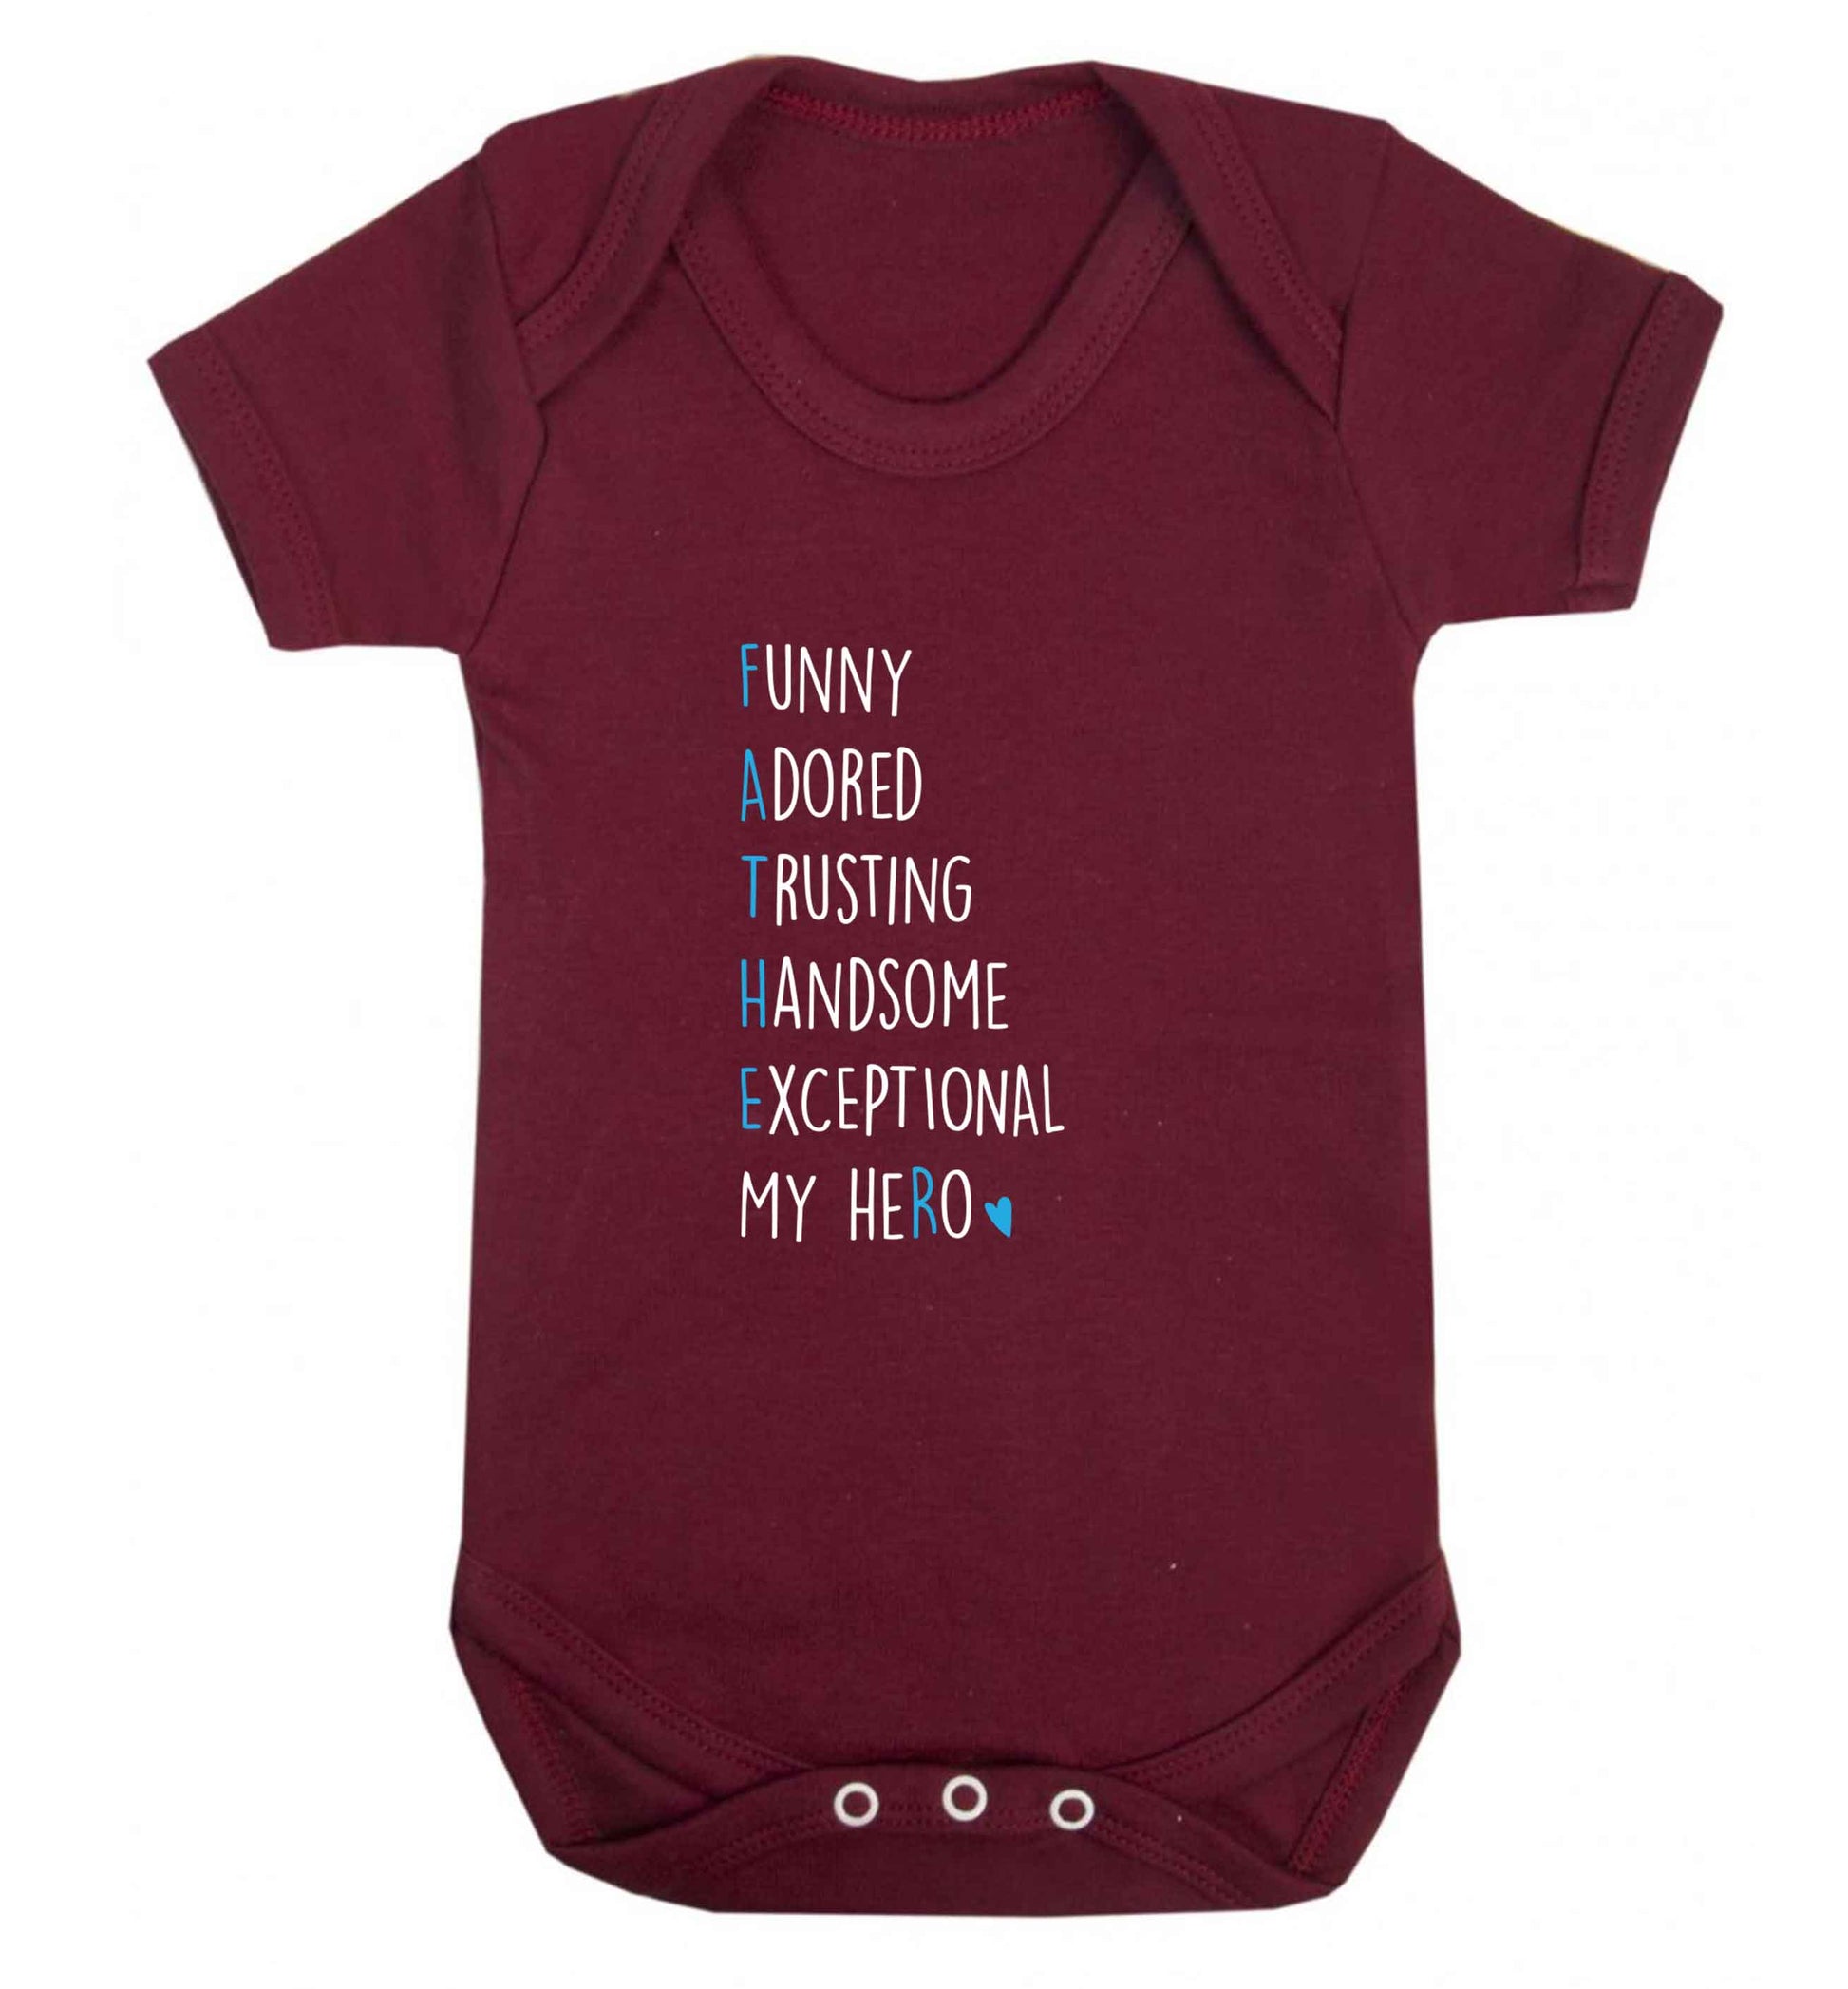 Father meaning hero acrostic poem baby vest maroon 18-24 months